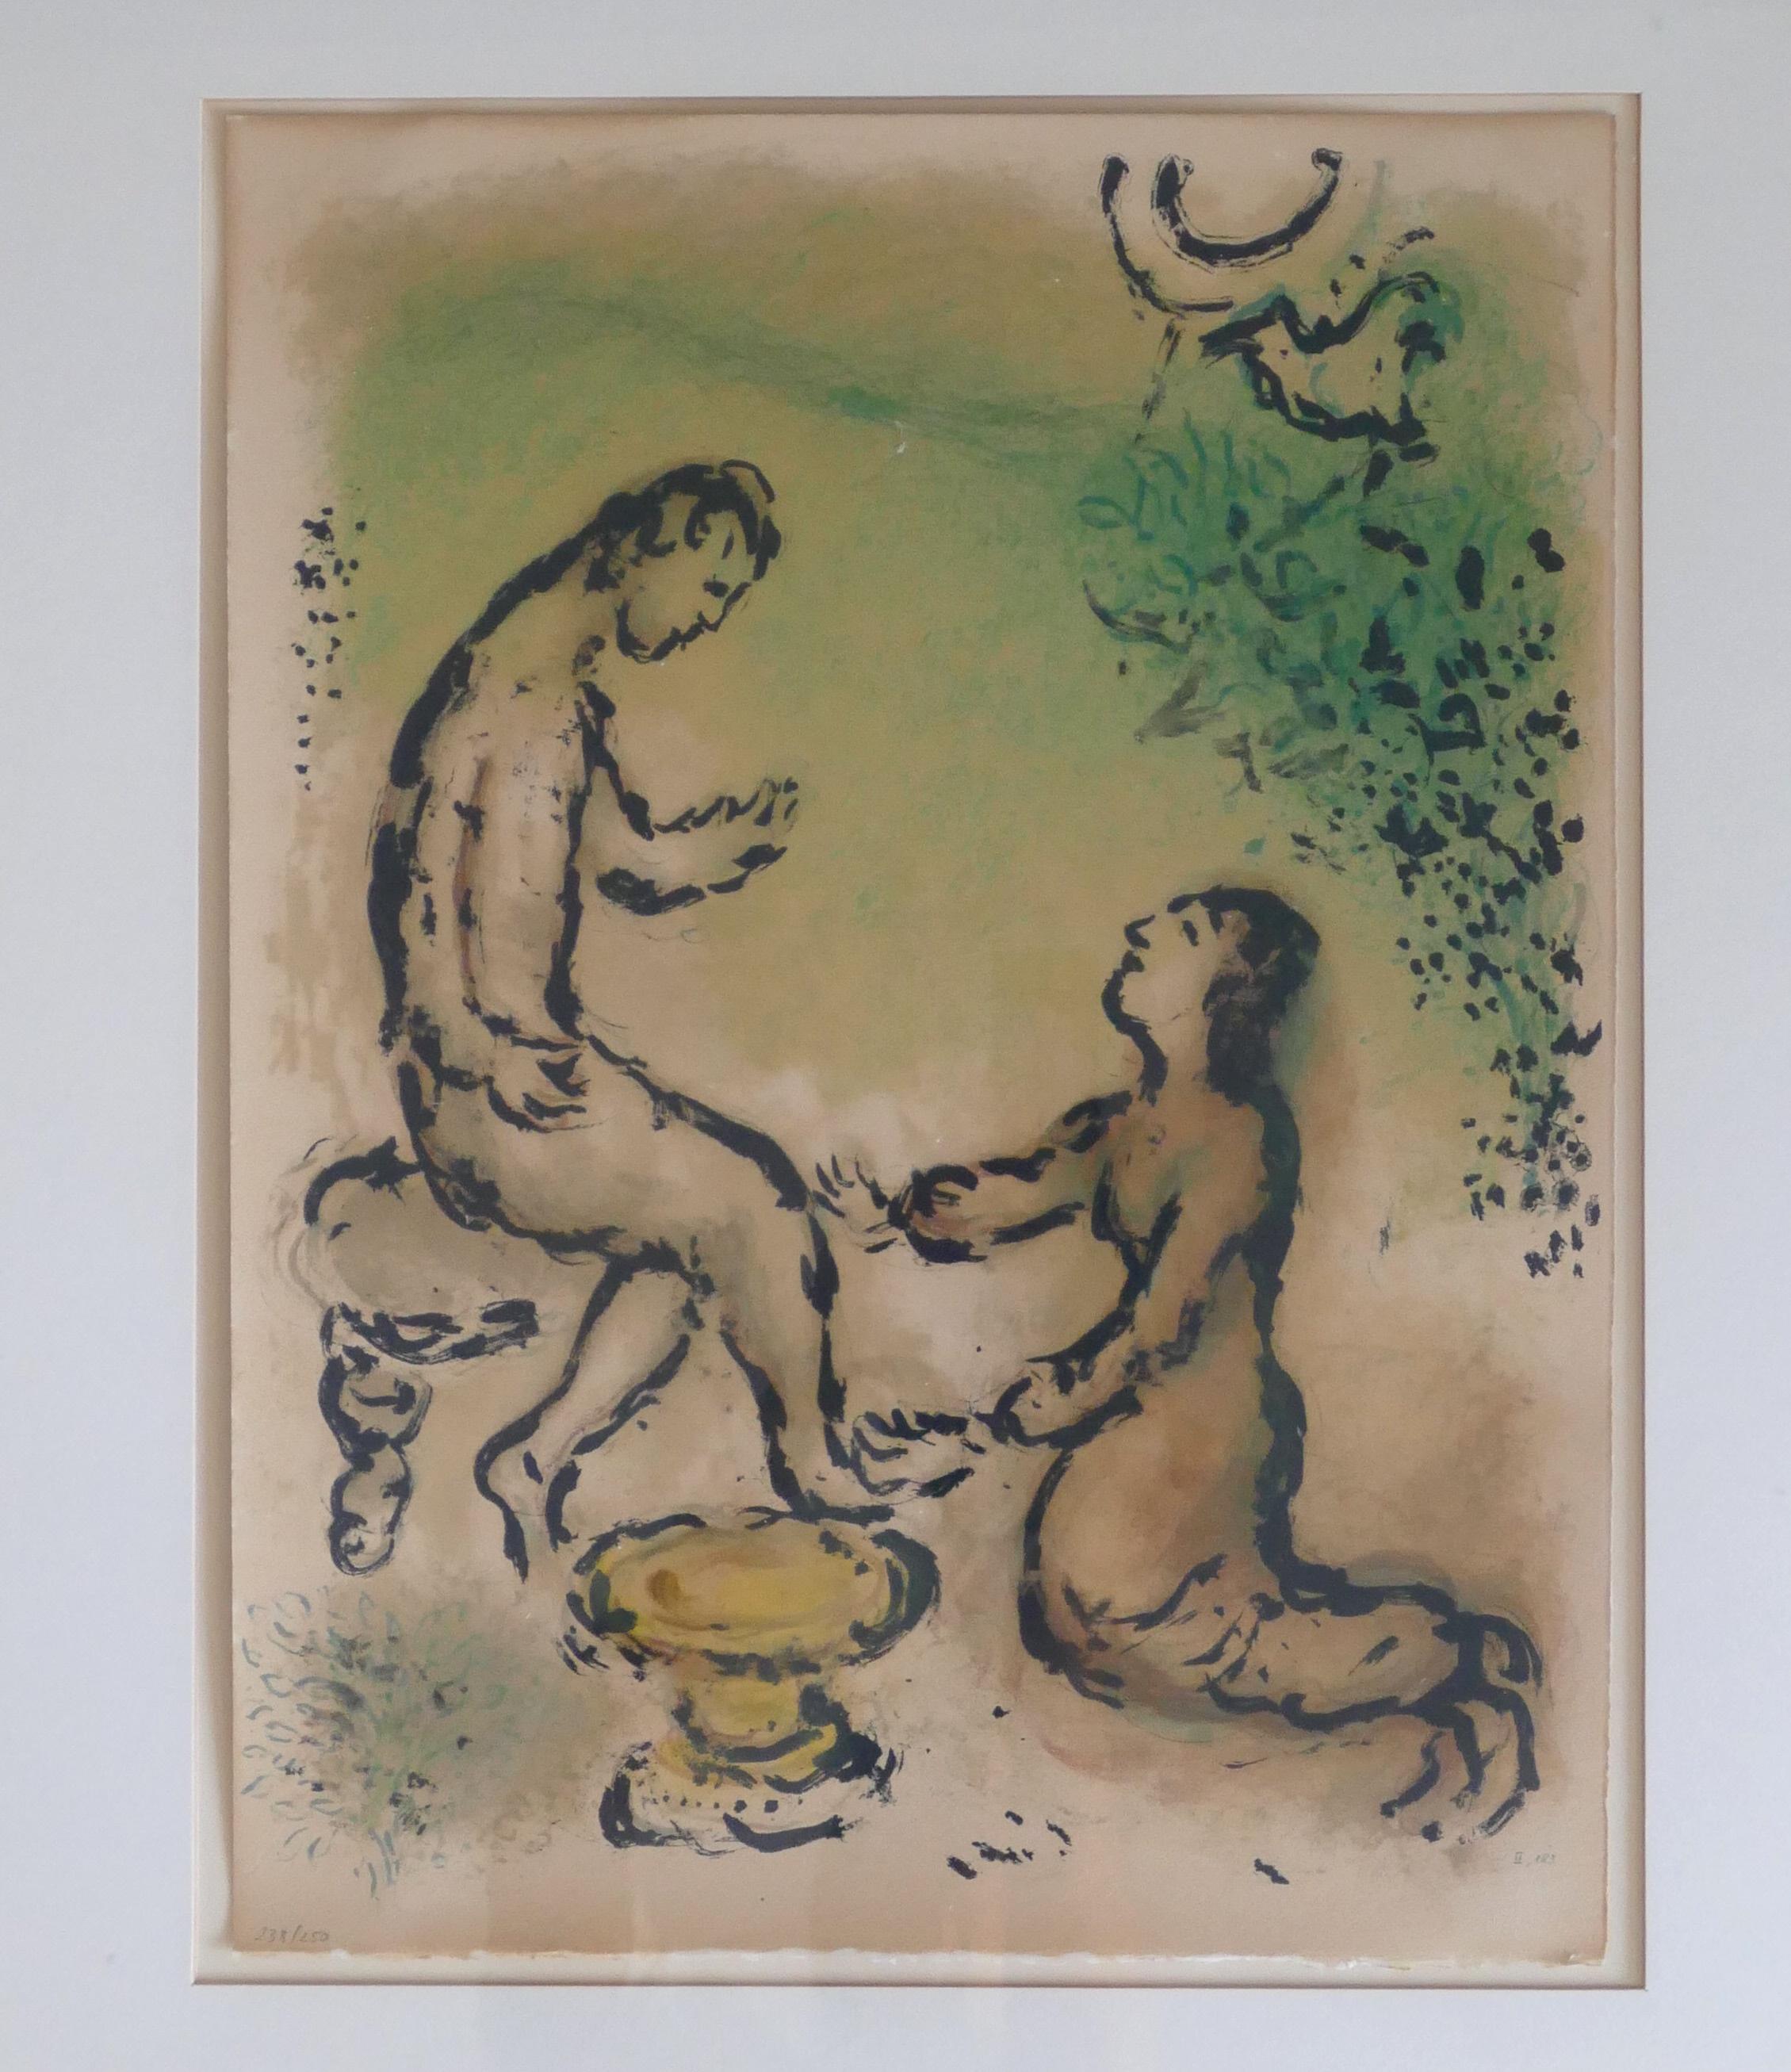 Original Lithograph realized by Marc Chagall as frontispiece of the "Odyssey".

The 2 volumes of the Odyssey were completed in 1974 (the first) and 1975 (the second) and they were richly illustrated by lithographic images realized by Chagall that